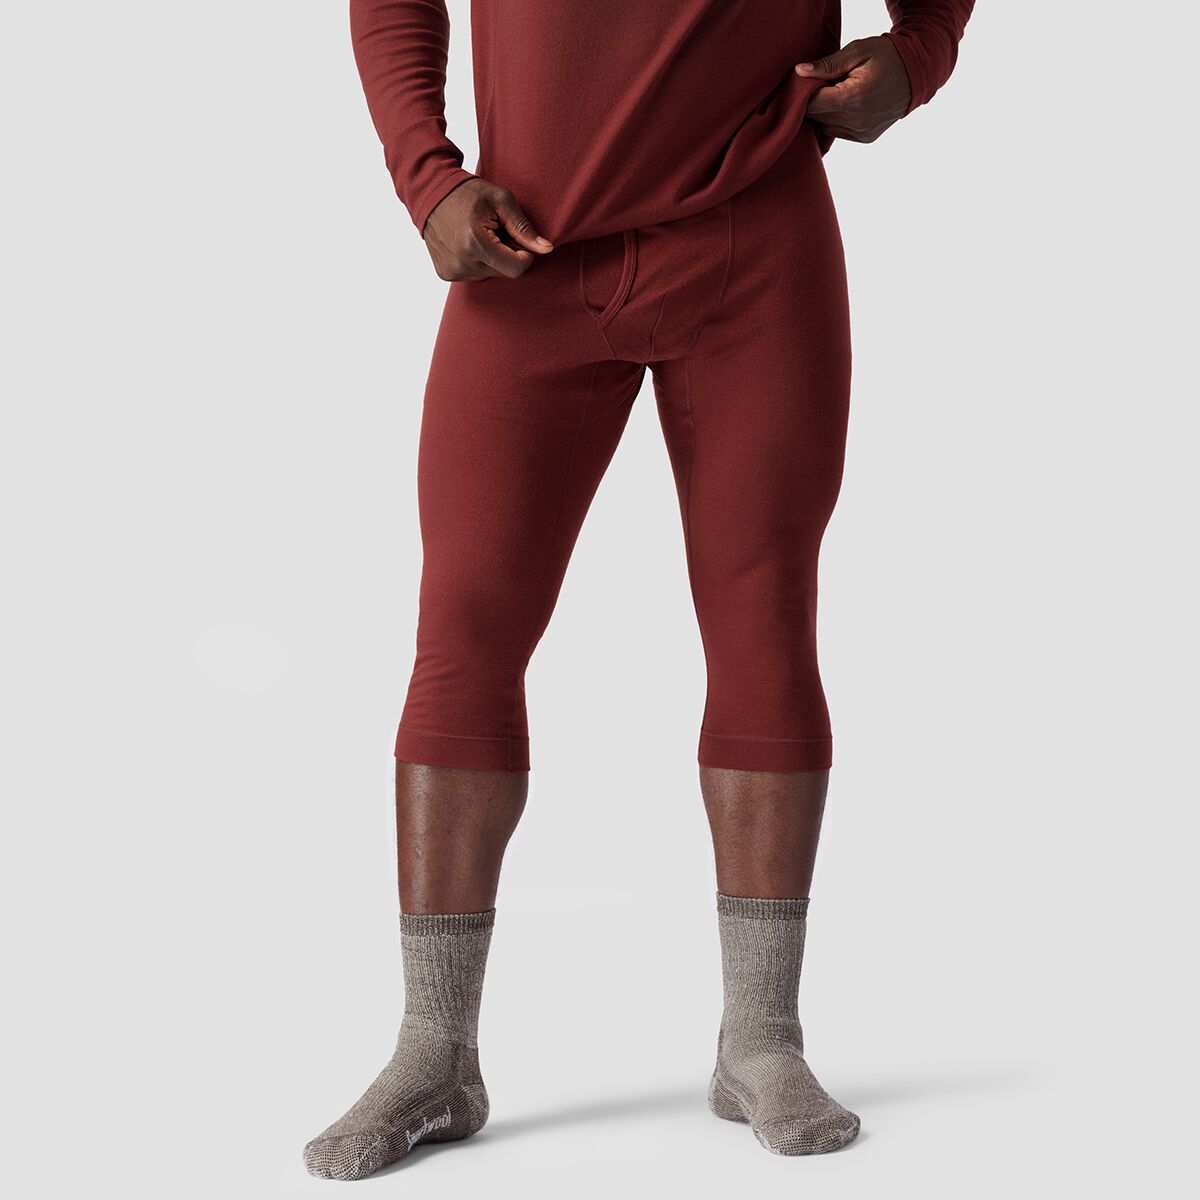 Backcountry Spruces Mid-Weight Merino 3/4 Baselayer Bottom - Men's